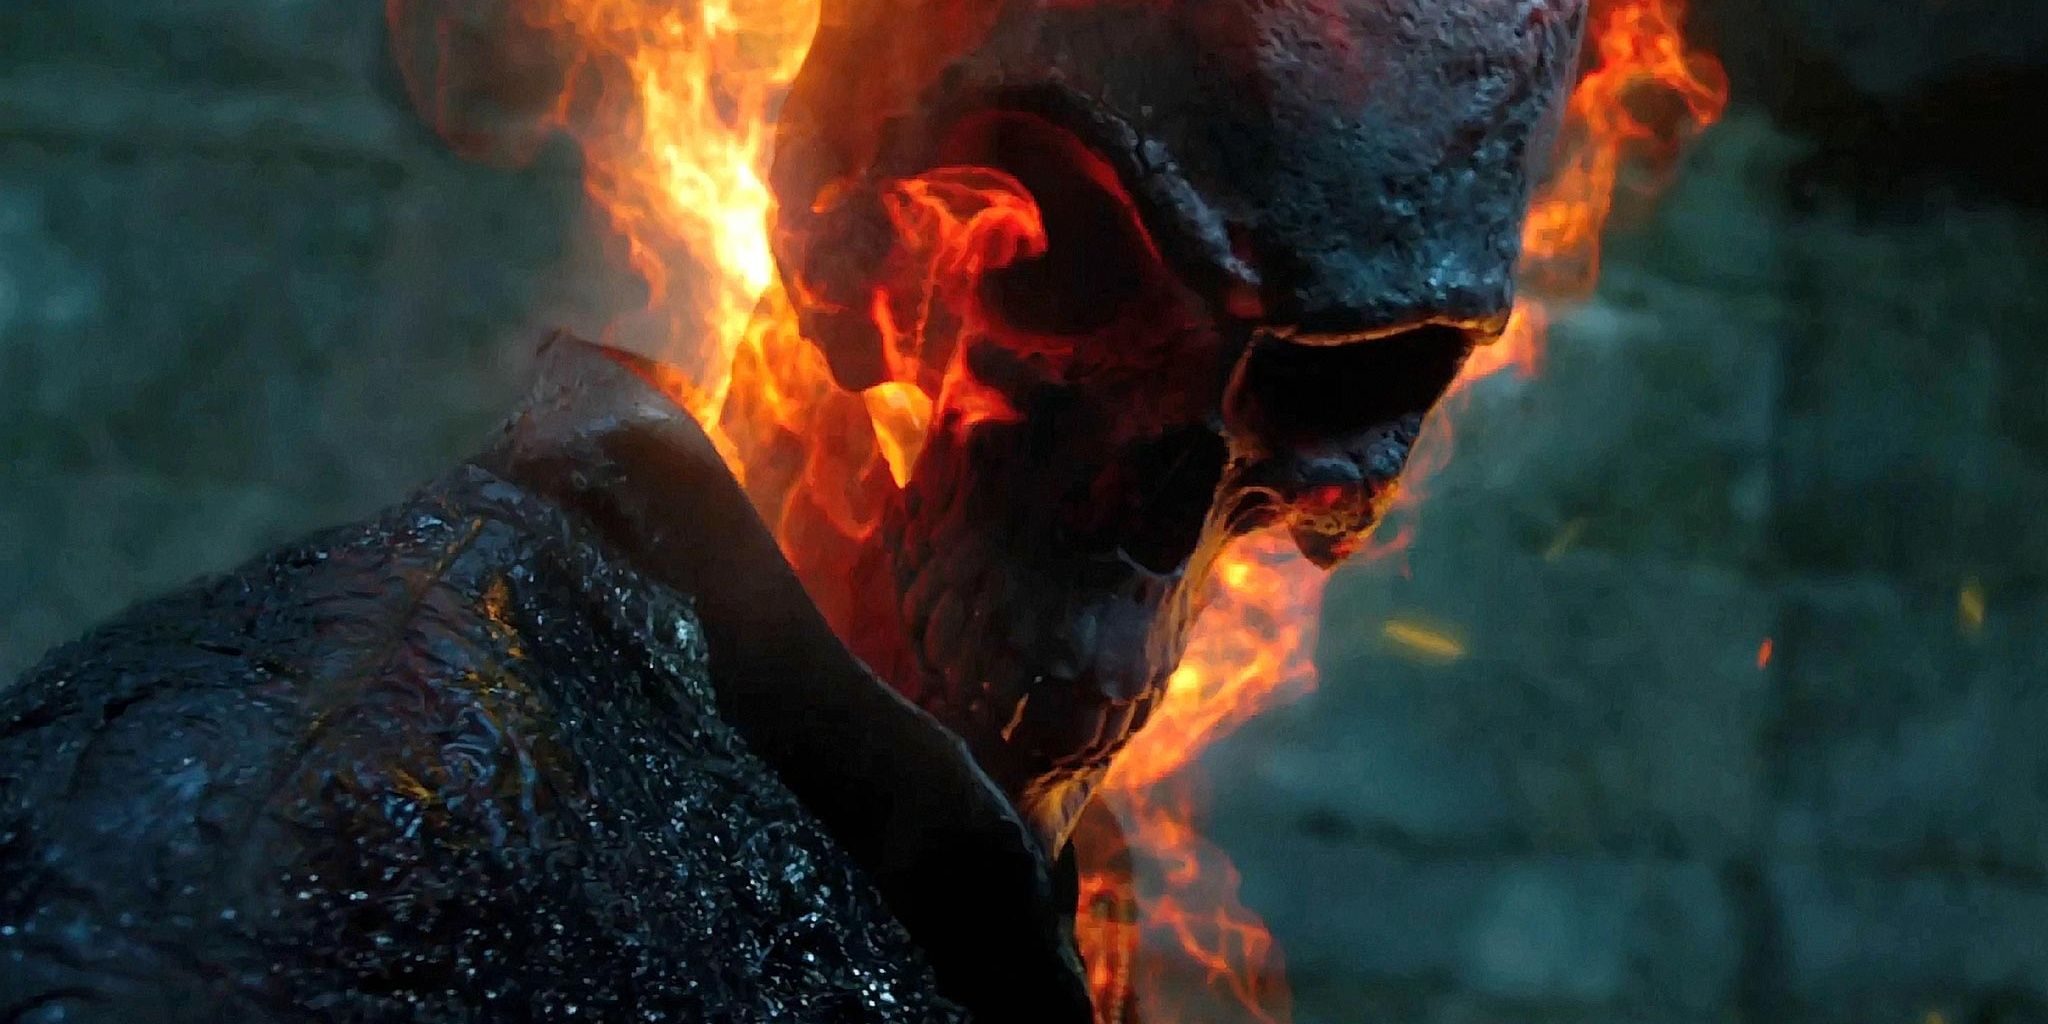 Nic Cage turns into Ghost Rider in Spirit of Vengeance. Cropped